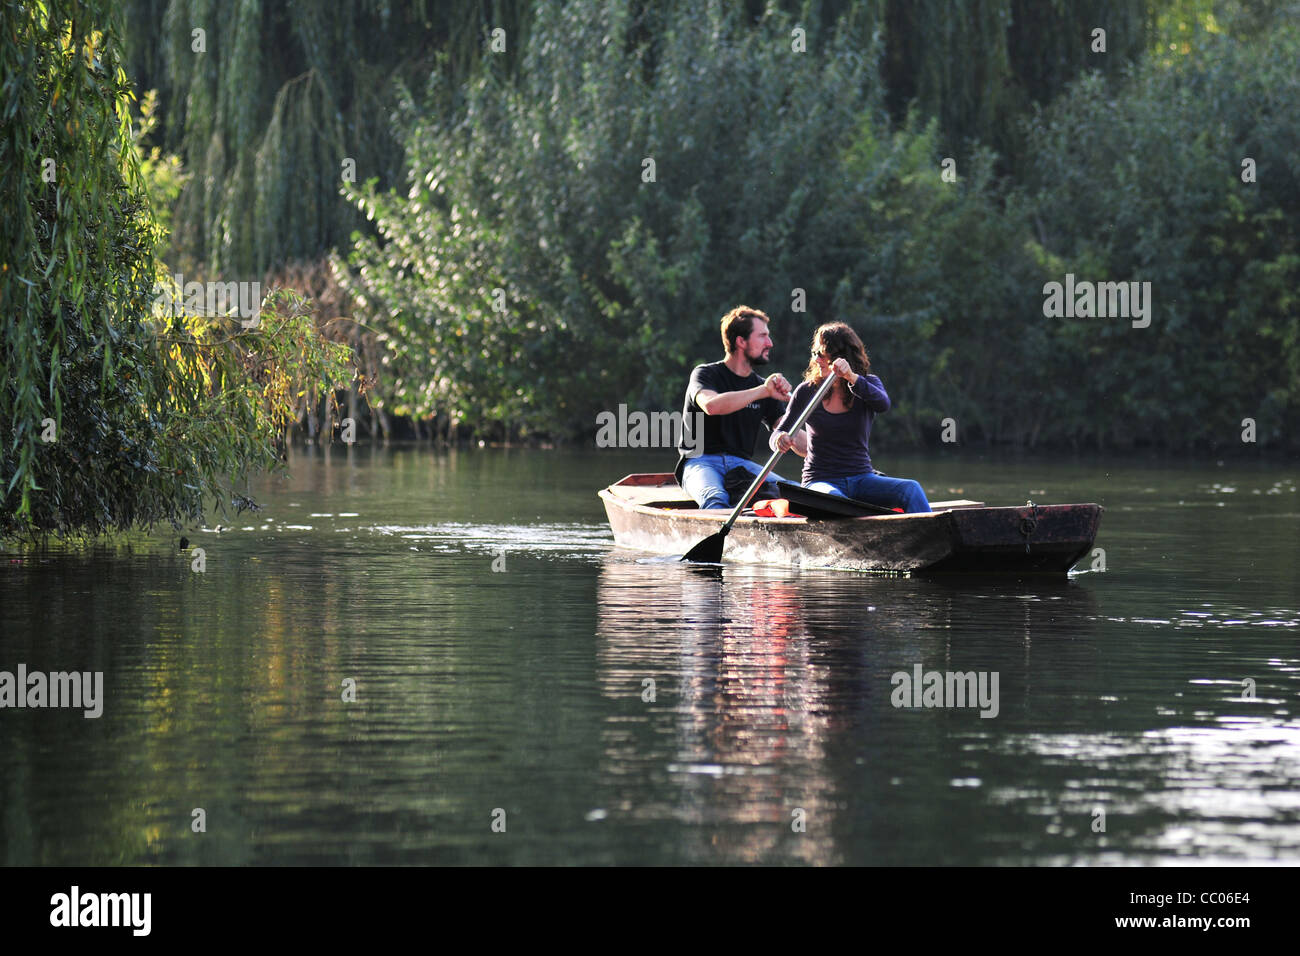 BOAT RIDE THROUGH THE HORTILLONNAGES OR FLOATING GARDENS, AMIENS, SOMME (80), FRANCE Stock Photo